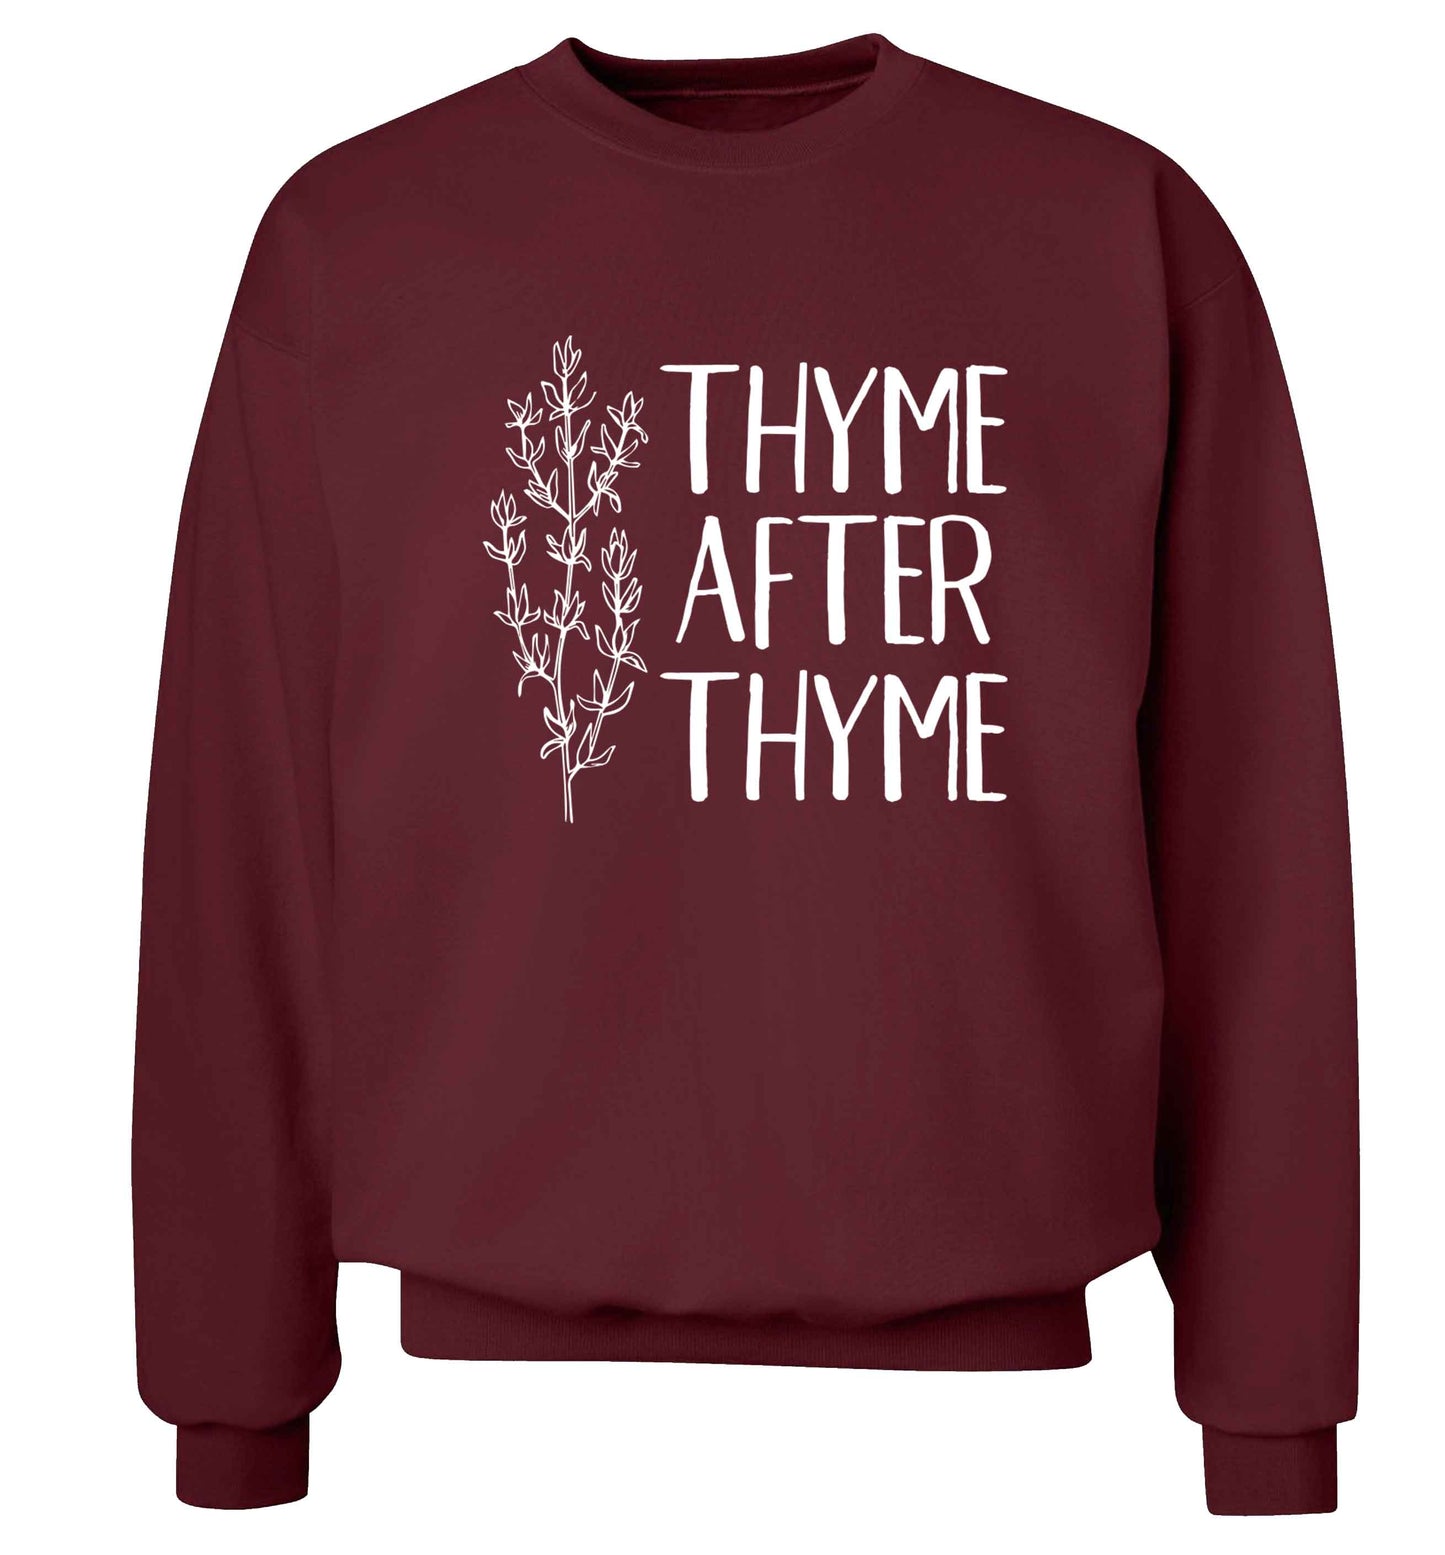 Thyme after thyme Adult's unisex maroon Sweater 2XL